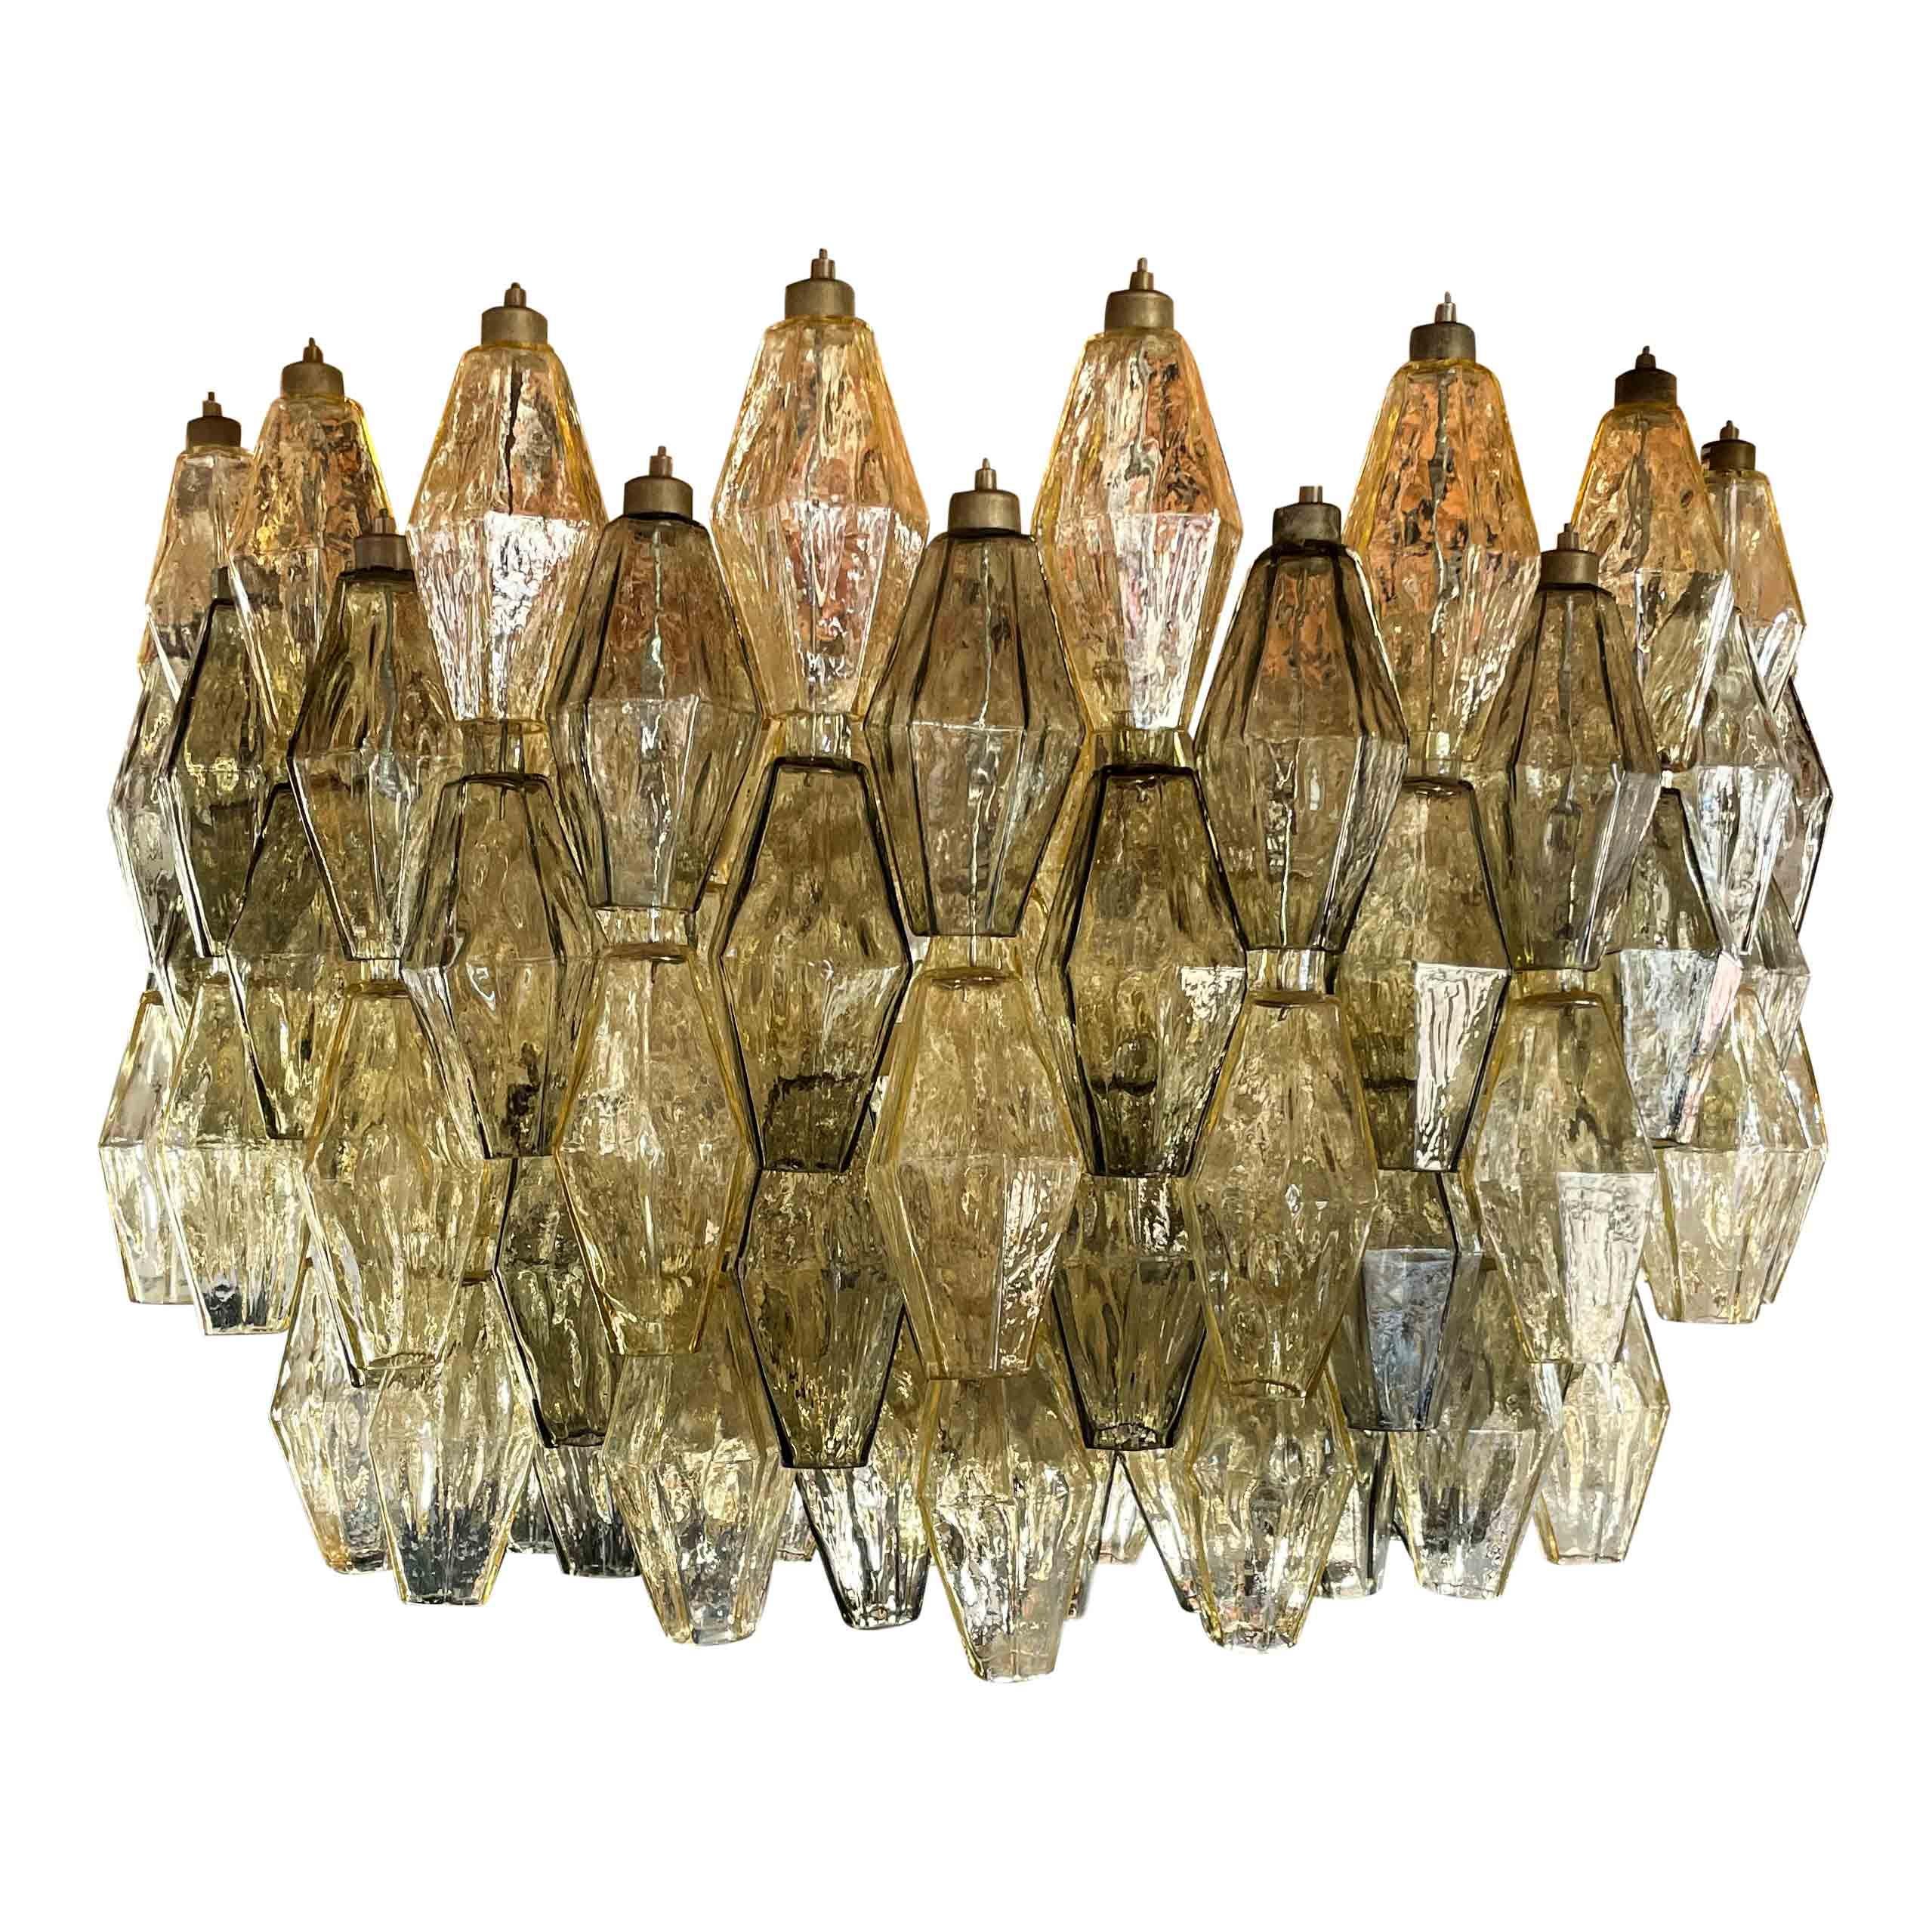 “Poliedri” chandelier designed by Carlo Scarpa and produced by the Italian manufacturer Venini in, 1958.

Made of opaline Murano glass.

Born in Venice on June 2nd, 1906, Carlo Scarpa began working at a very early age. Only a year after he had